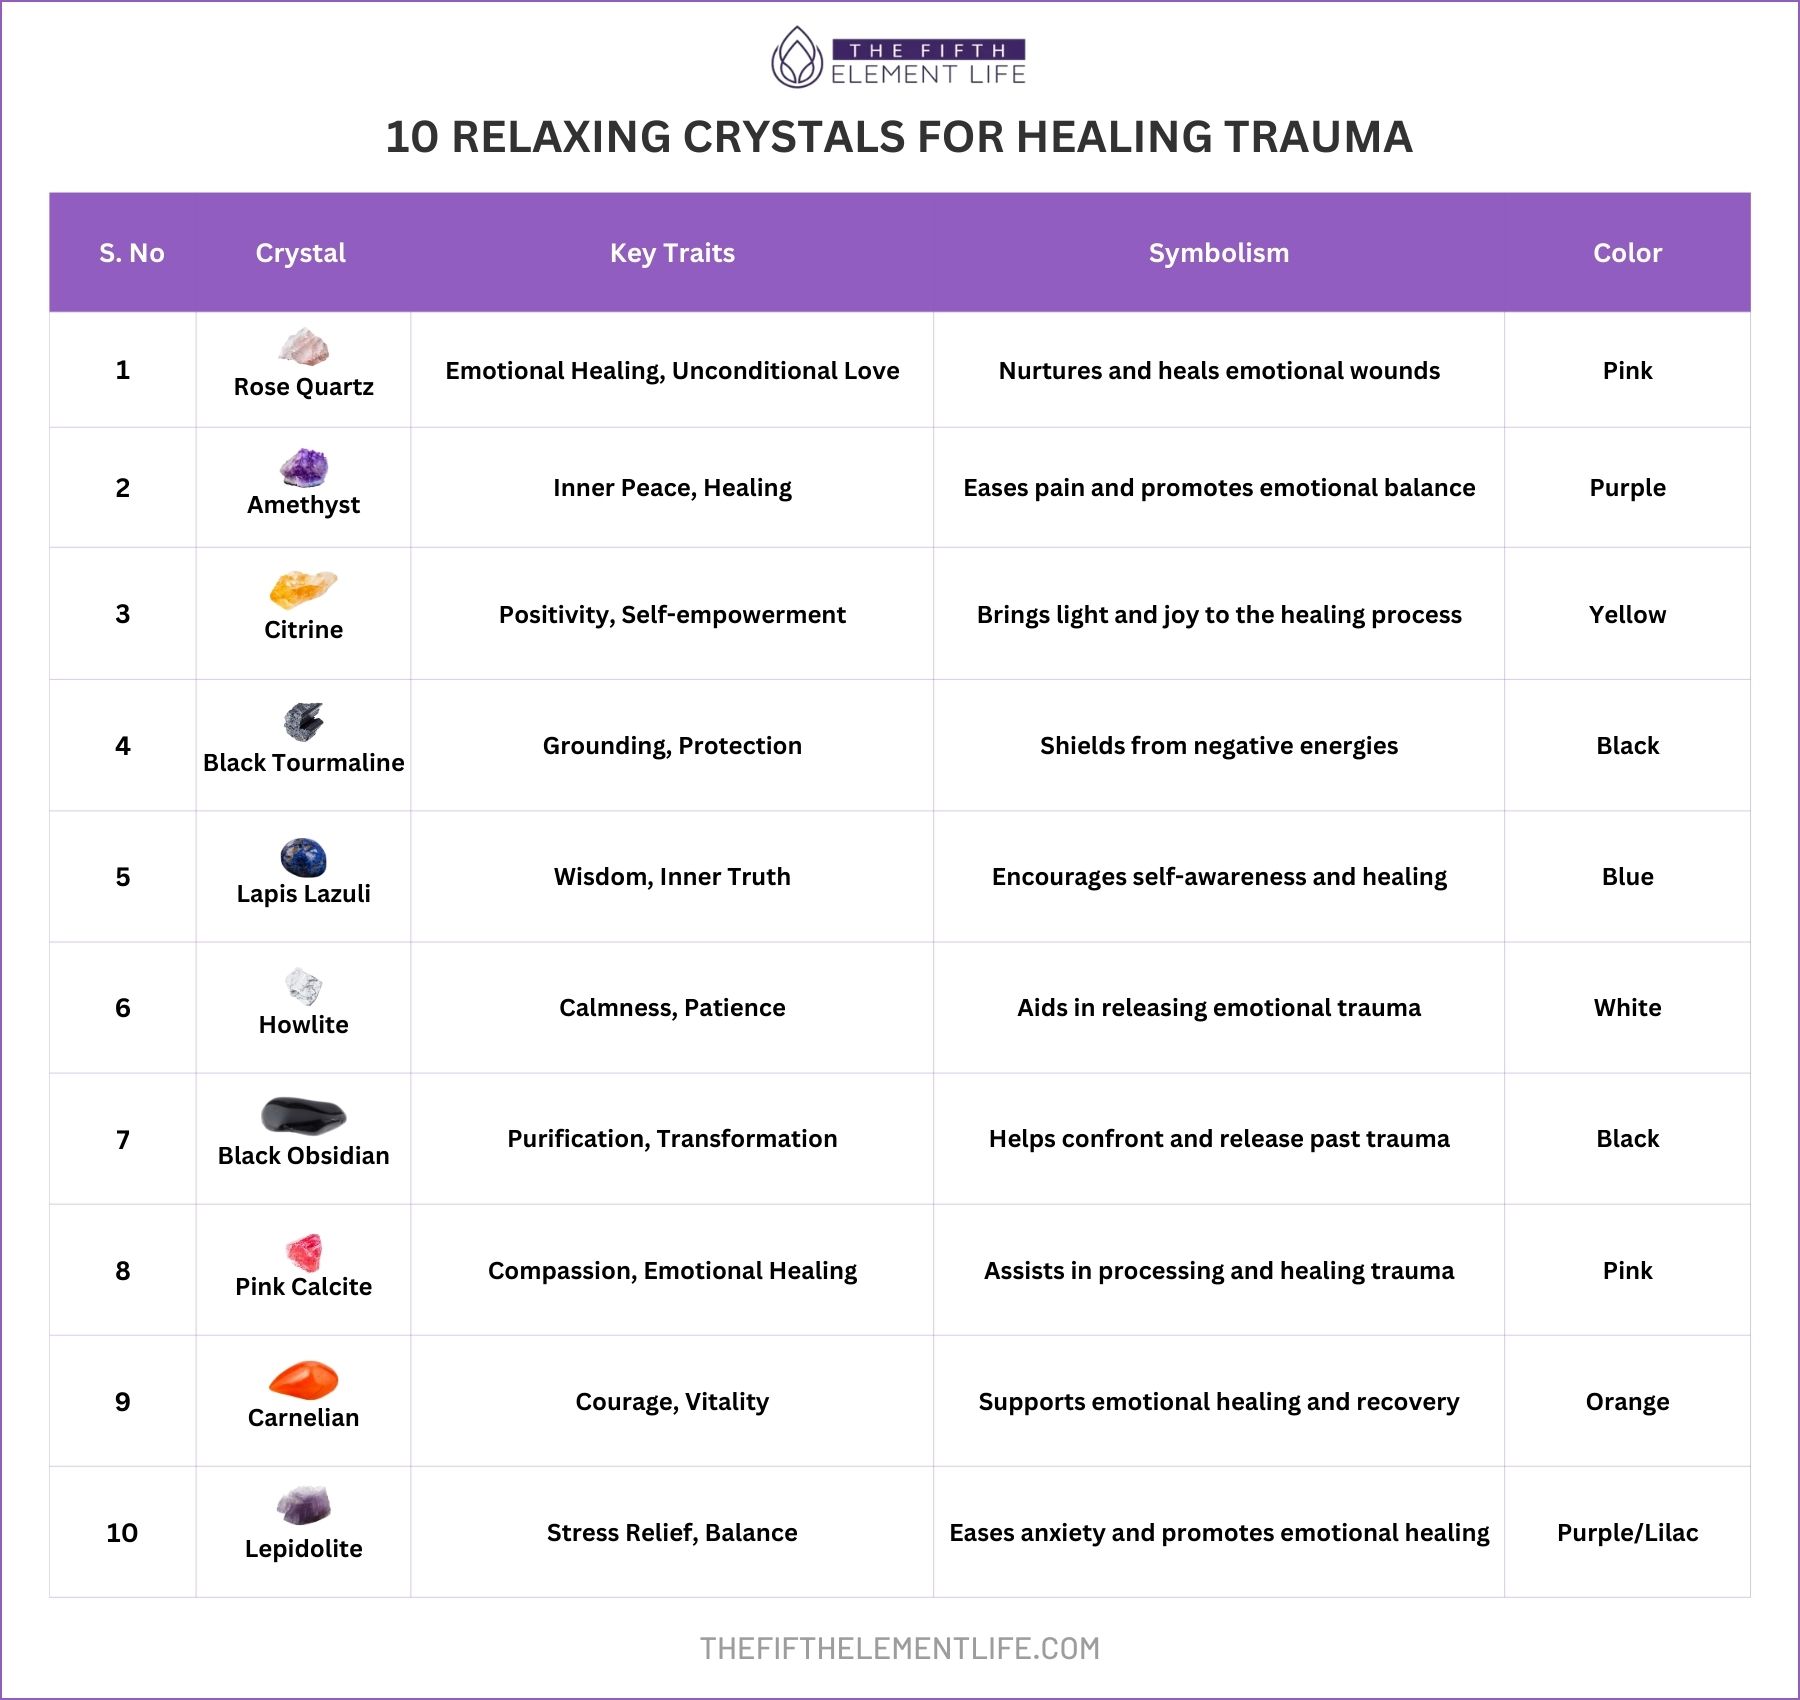 10 Relaxing Crystals For Healing Trauma